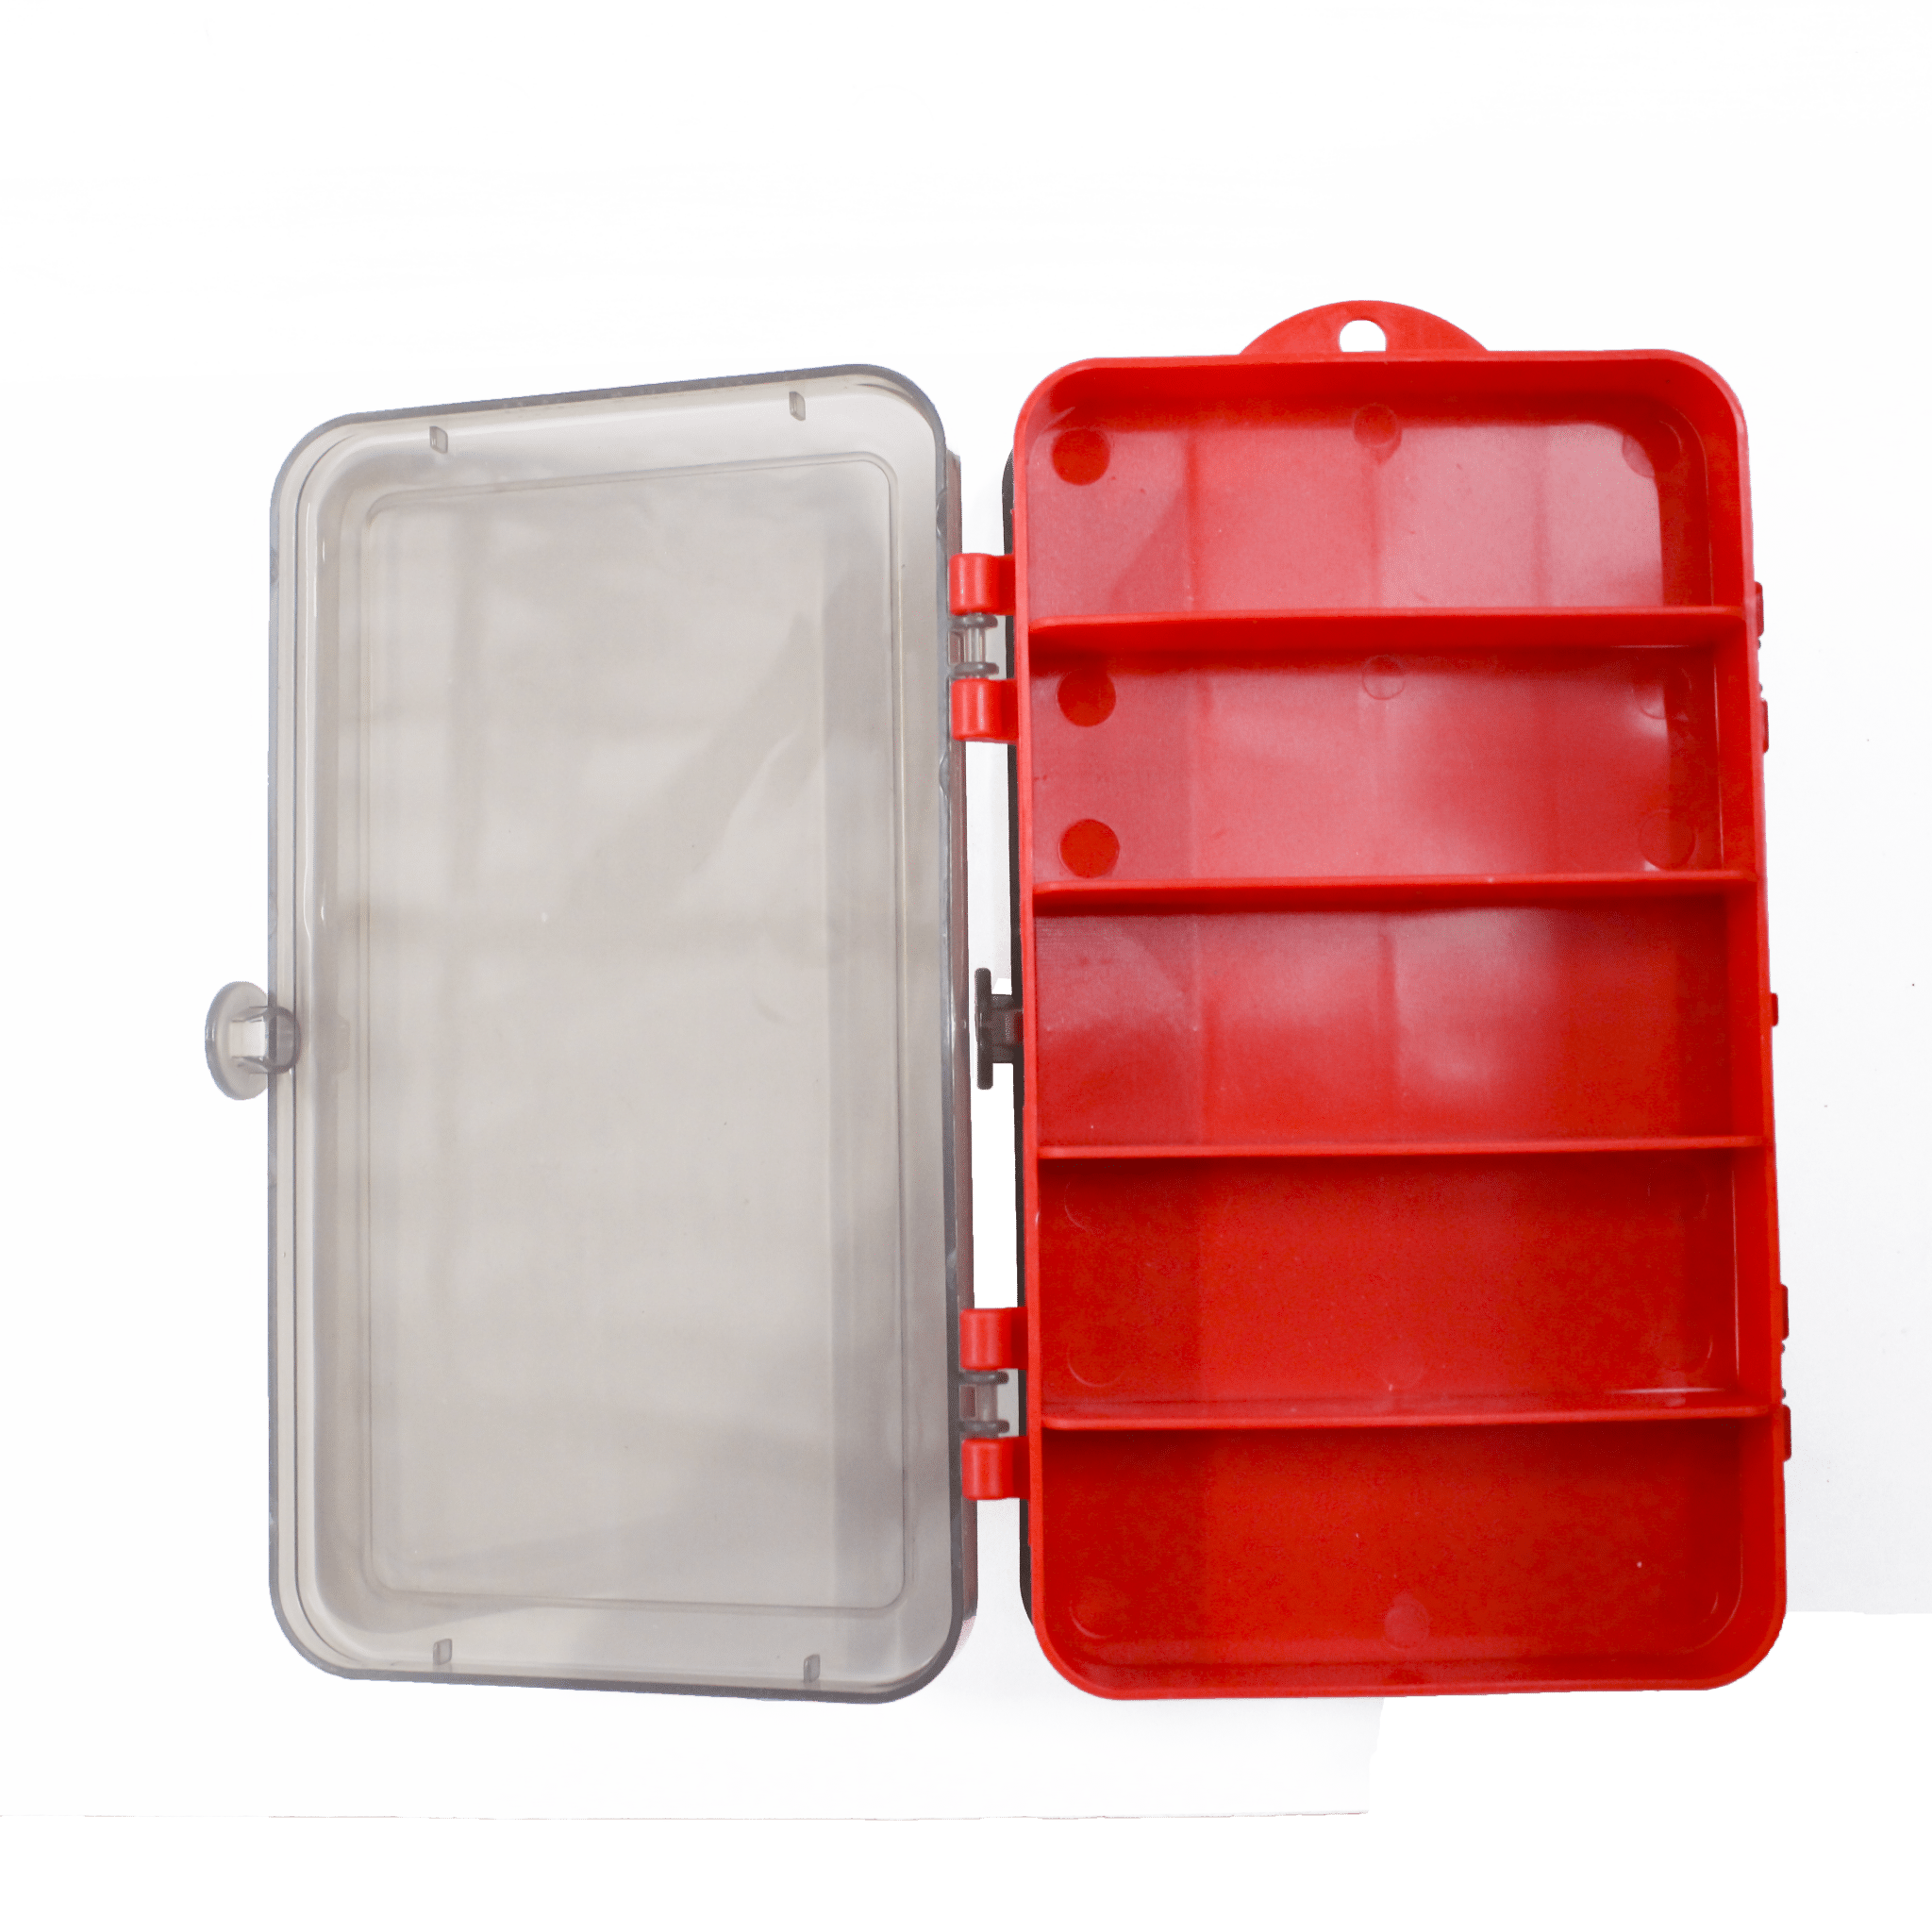 Searock Fishing Tackle Box | 13 compartments | 2 Sided - fishermanshub13 Compartment